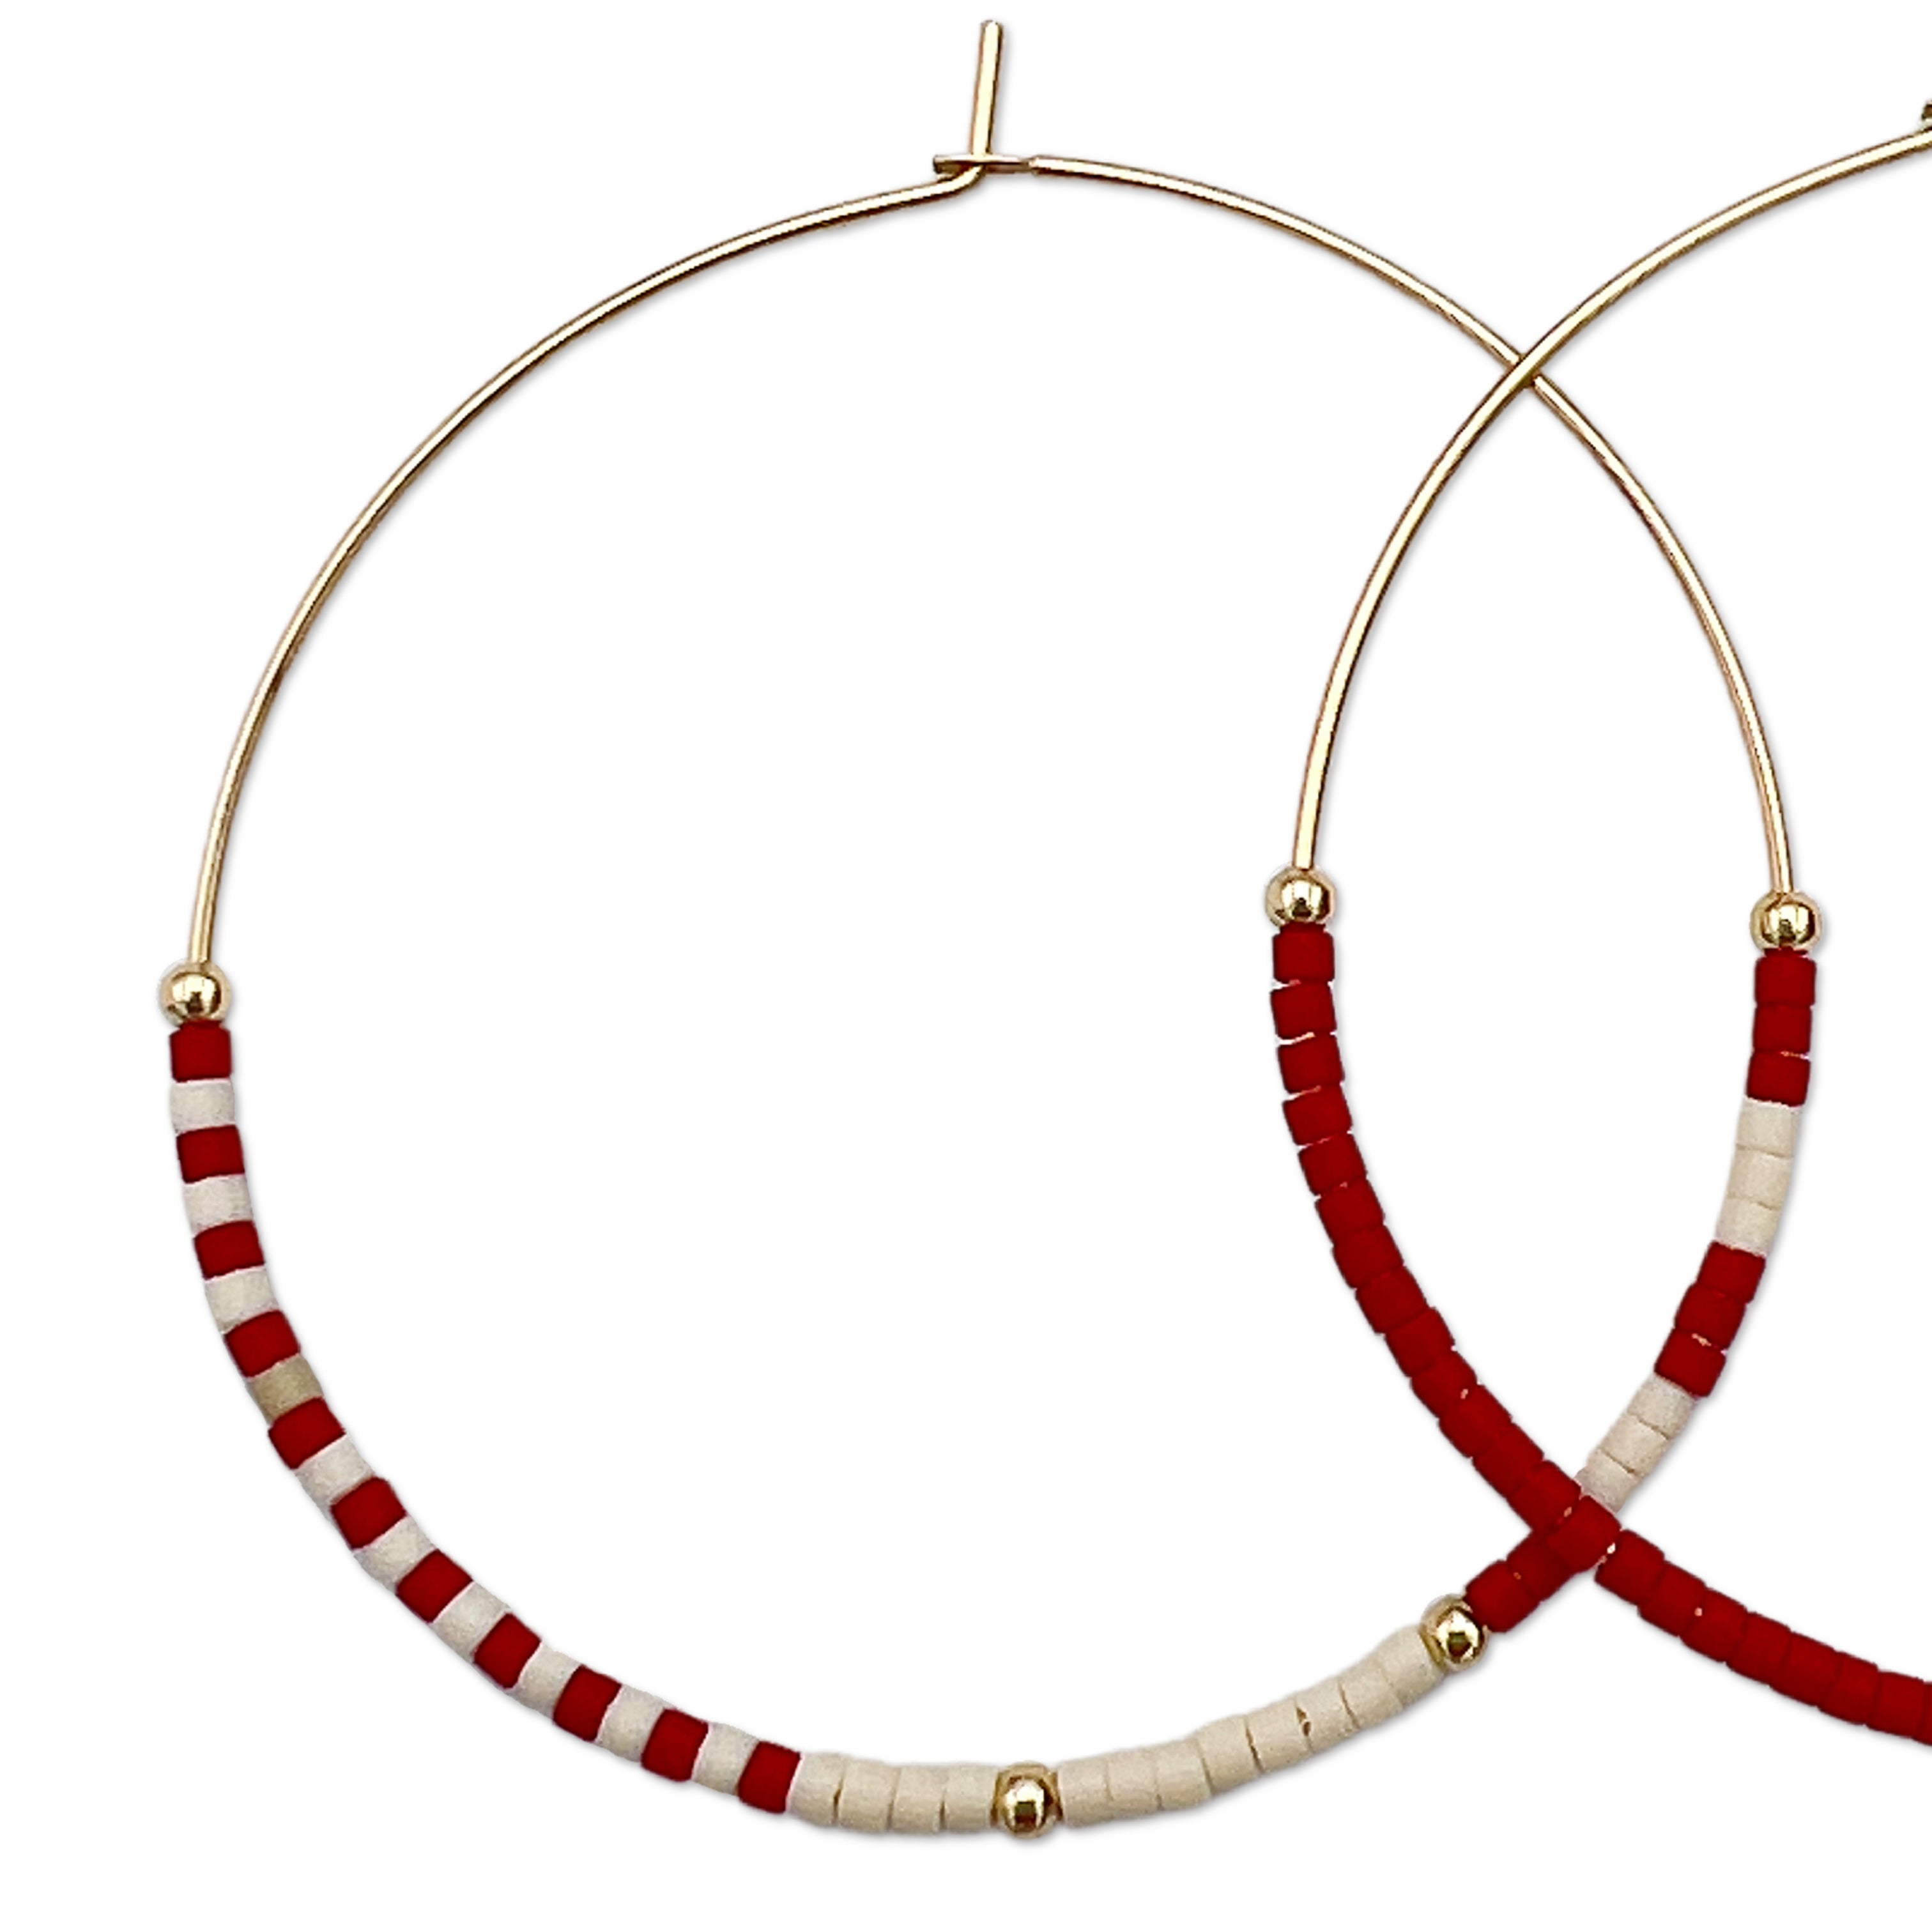 Red and white gold filled hoops